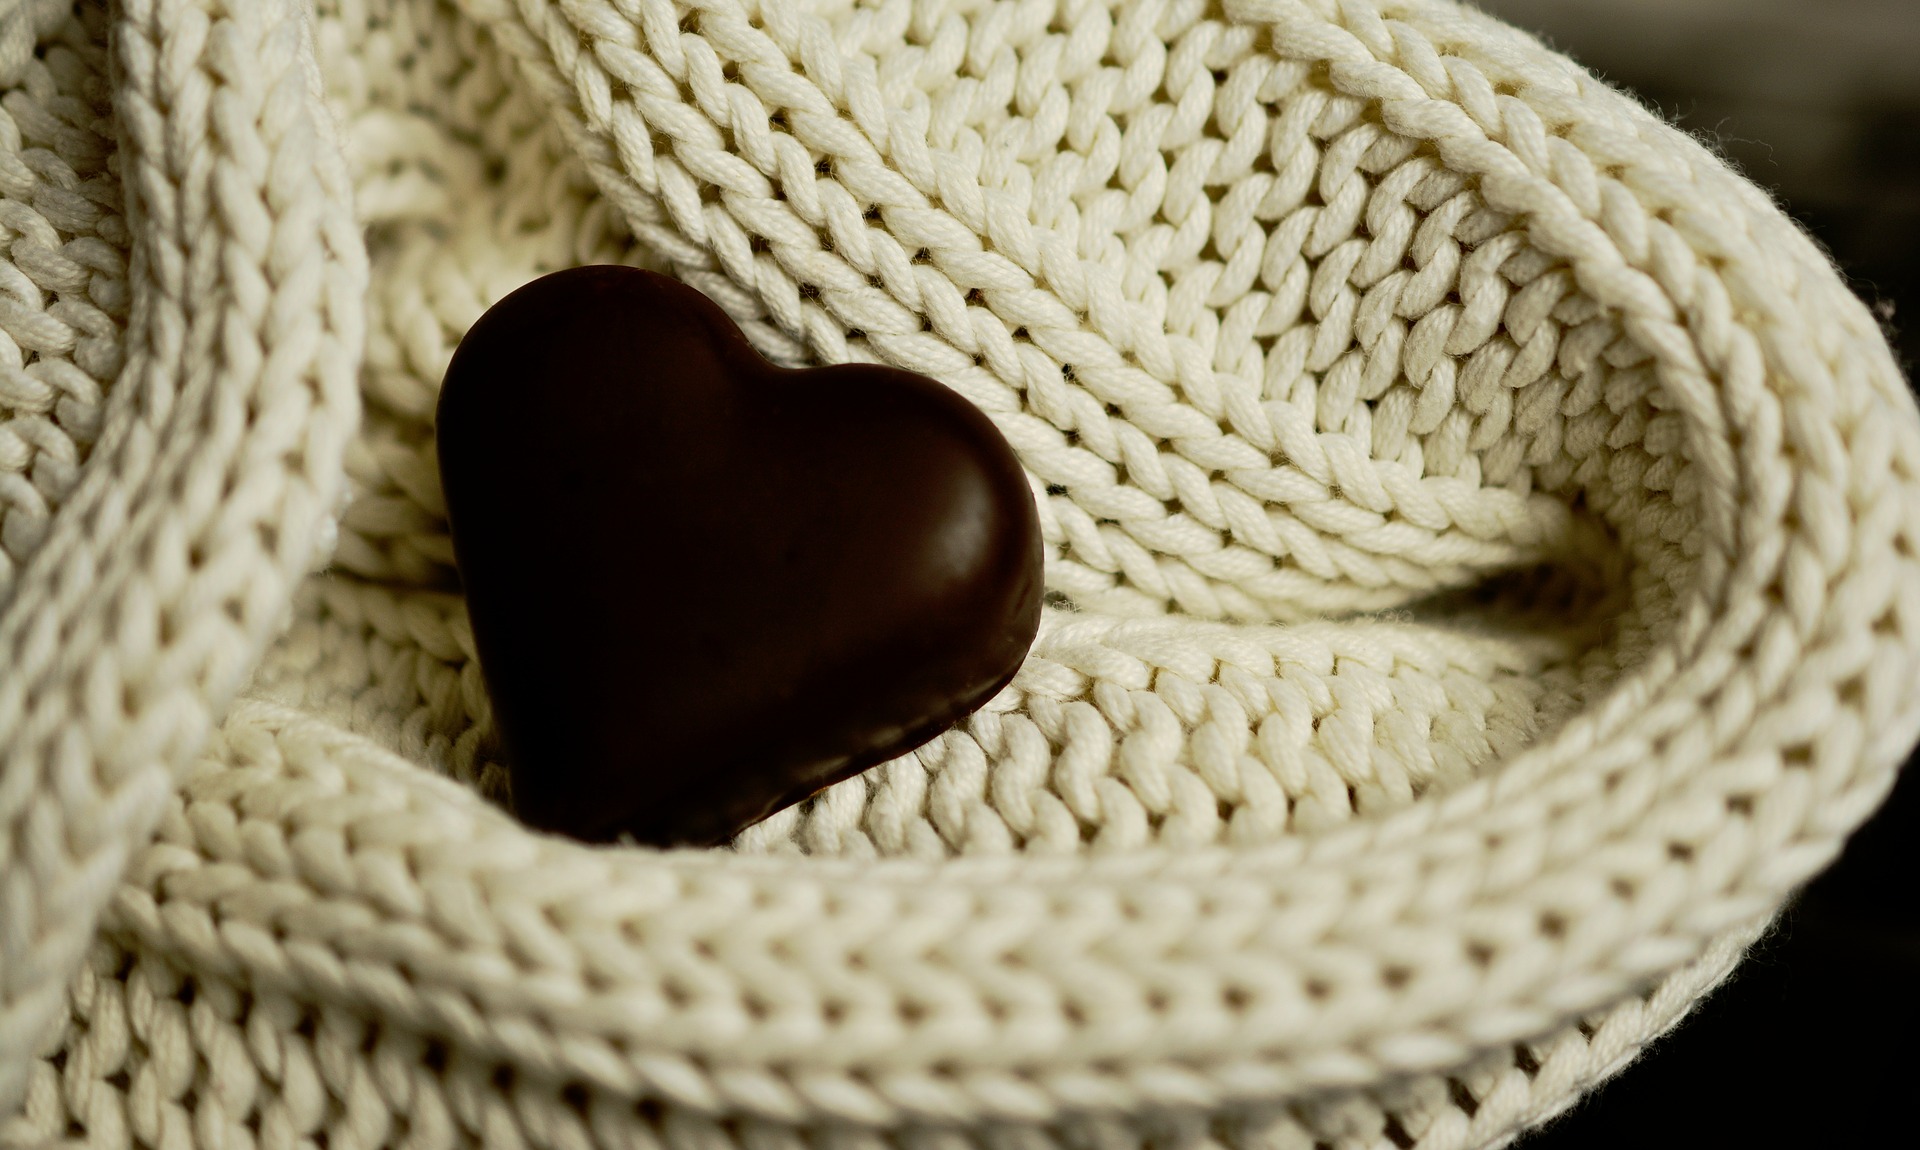 A heart-shaped chocolate on a knitted textile